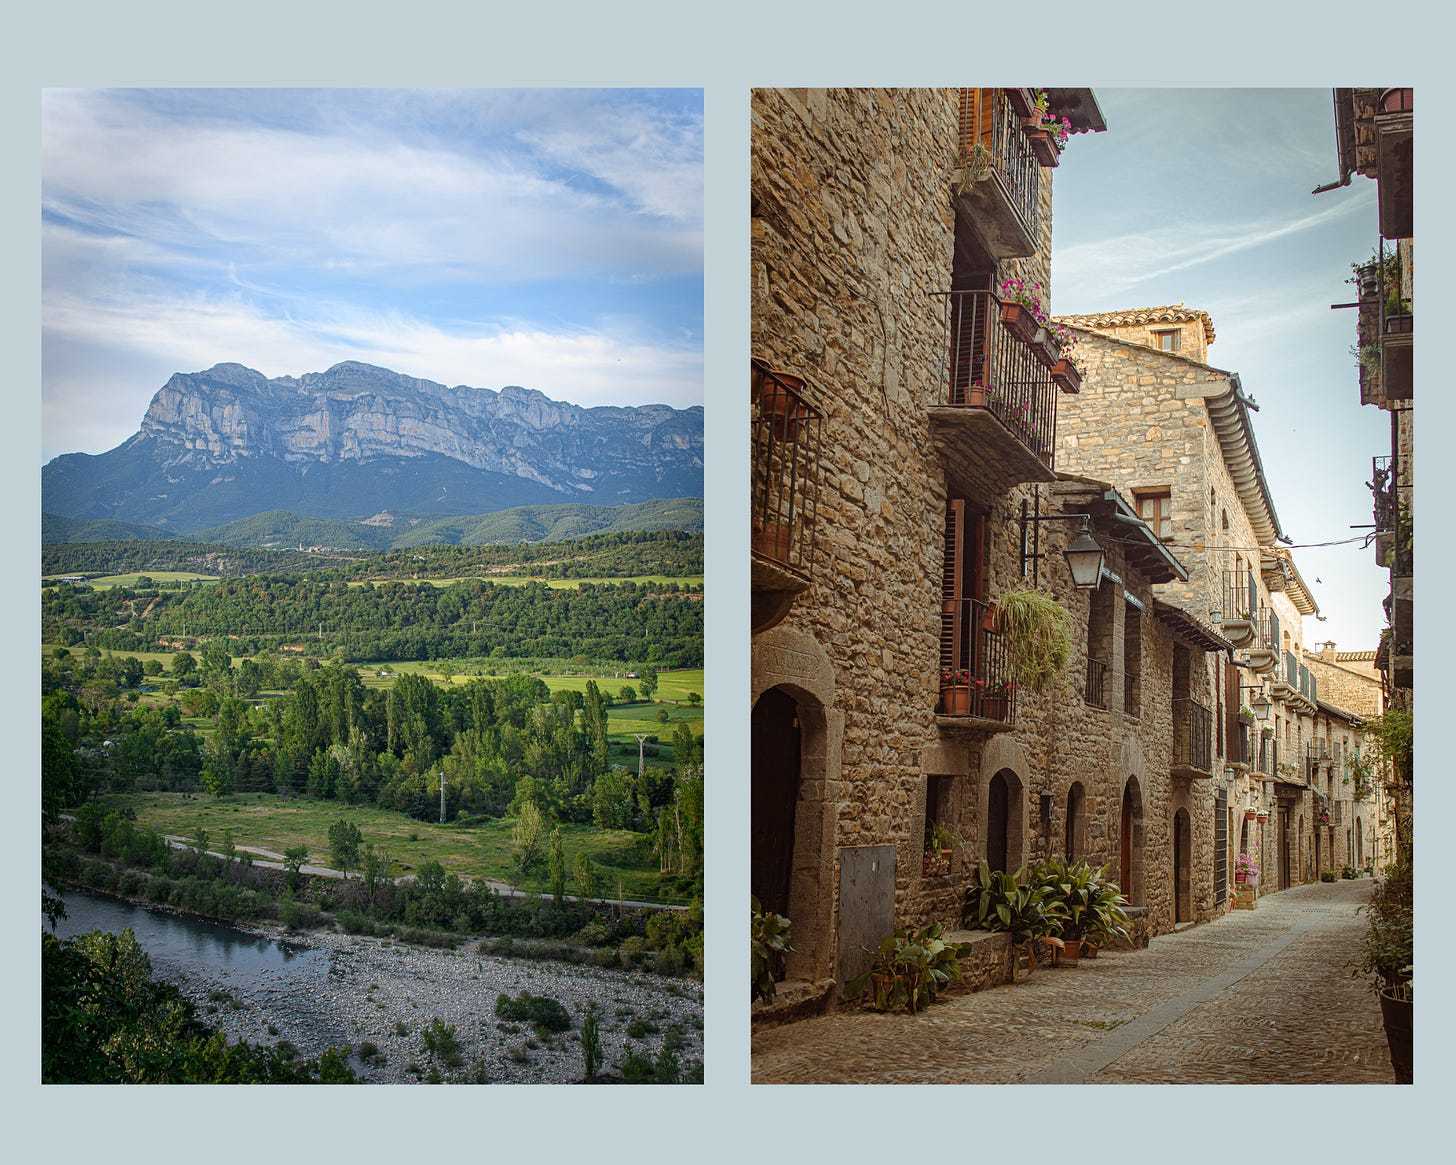 Ainsa and the Central Pyrenees